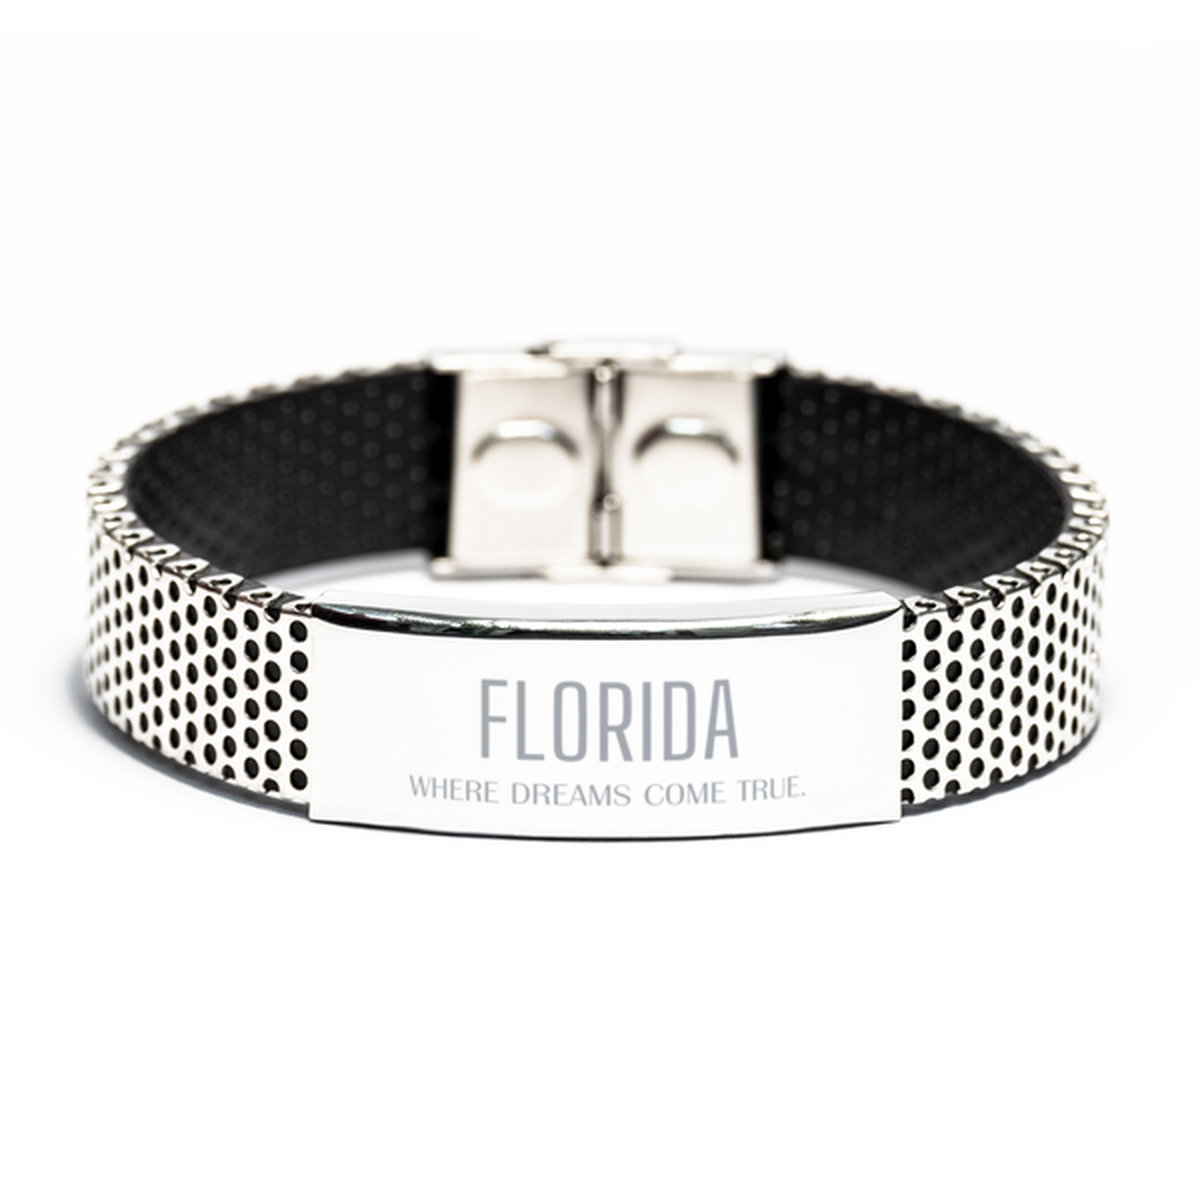 Love Florida State Stainless Steel Bracelet, Florida Where dreams come true, Birthday Inspirational Gifts For Florida Men, Women, Friends